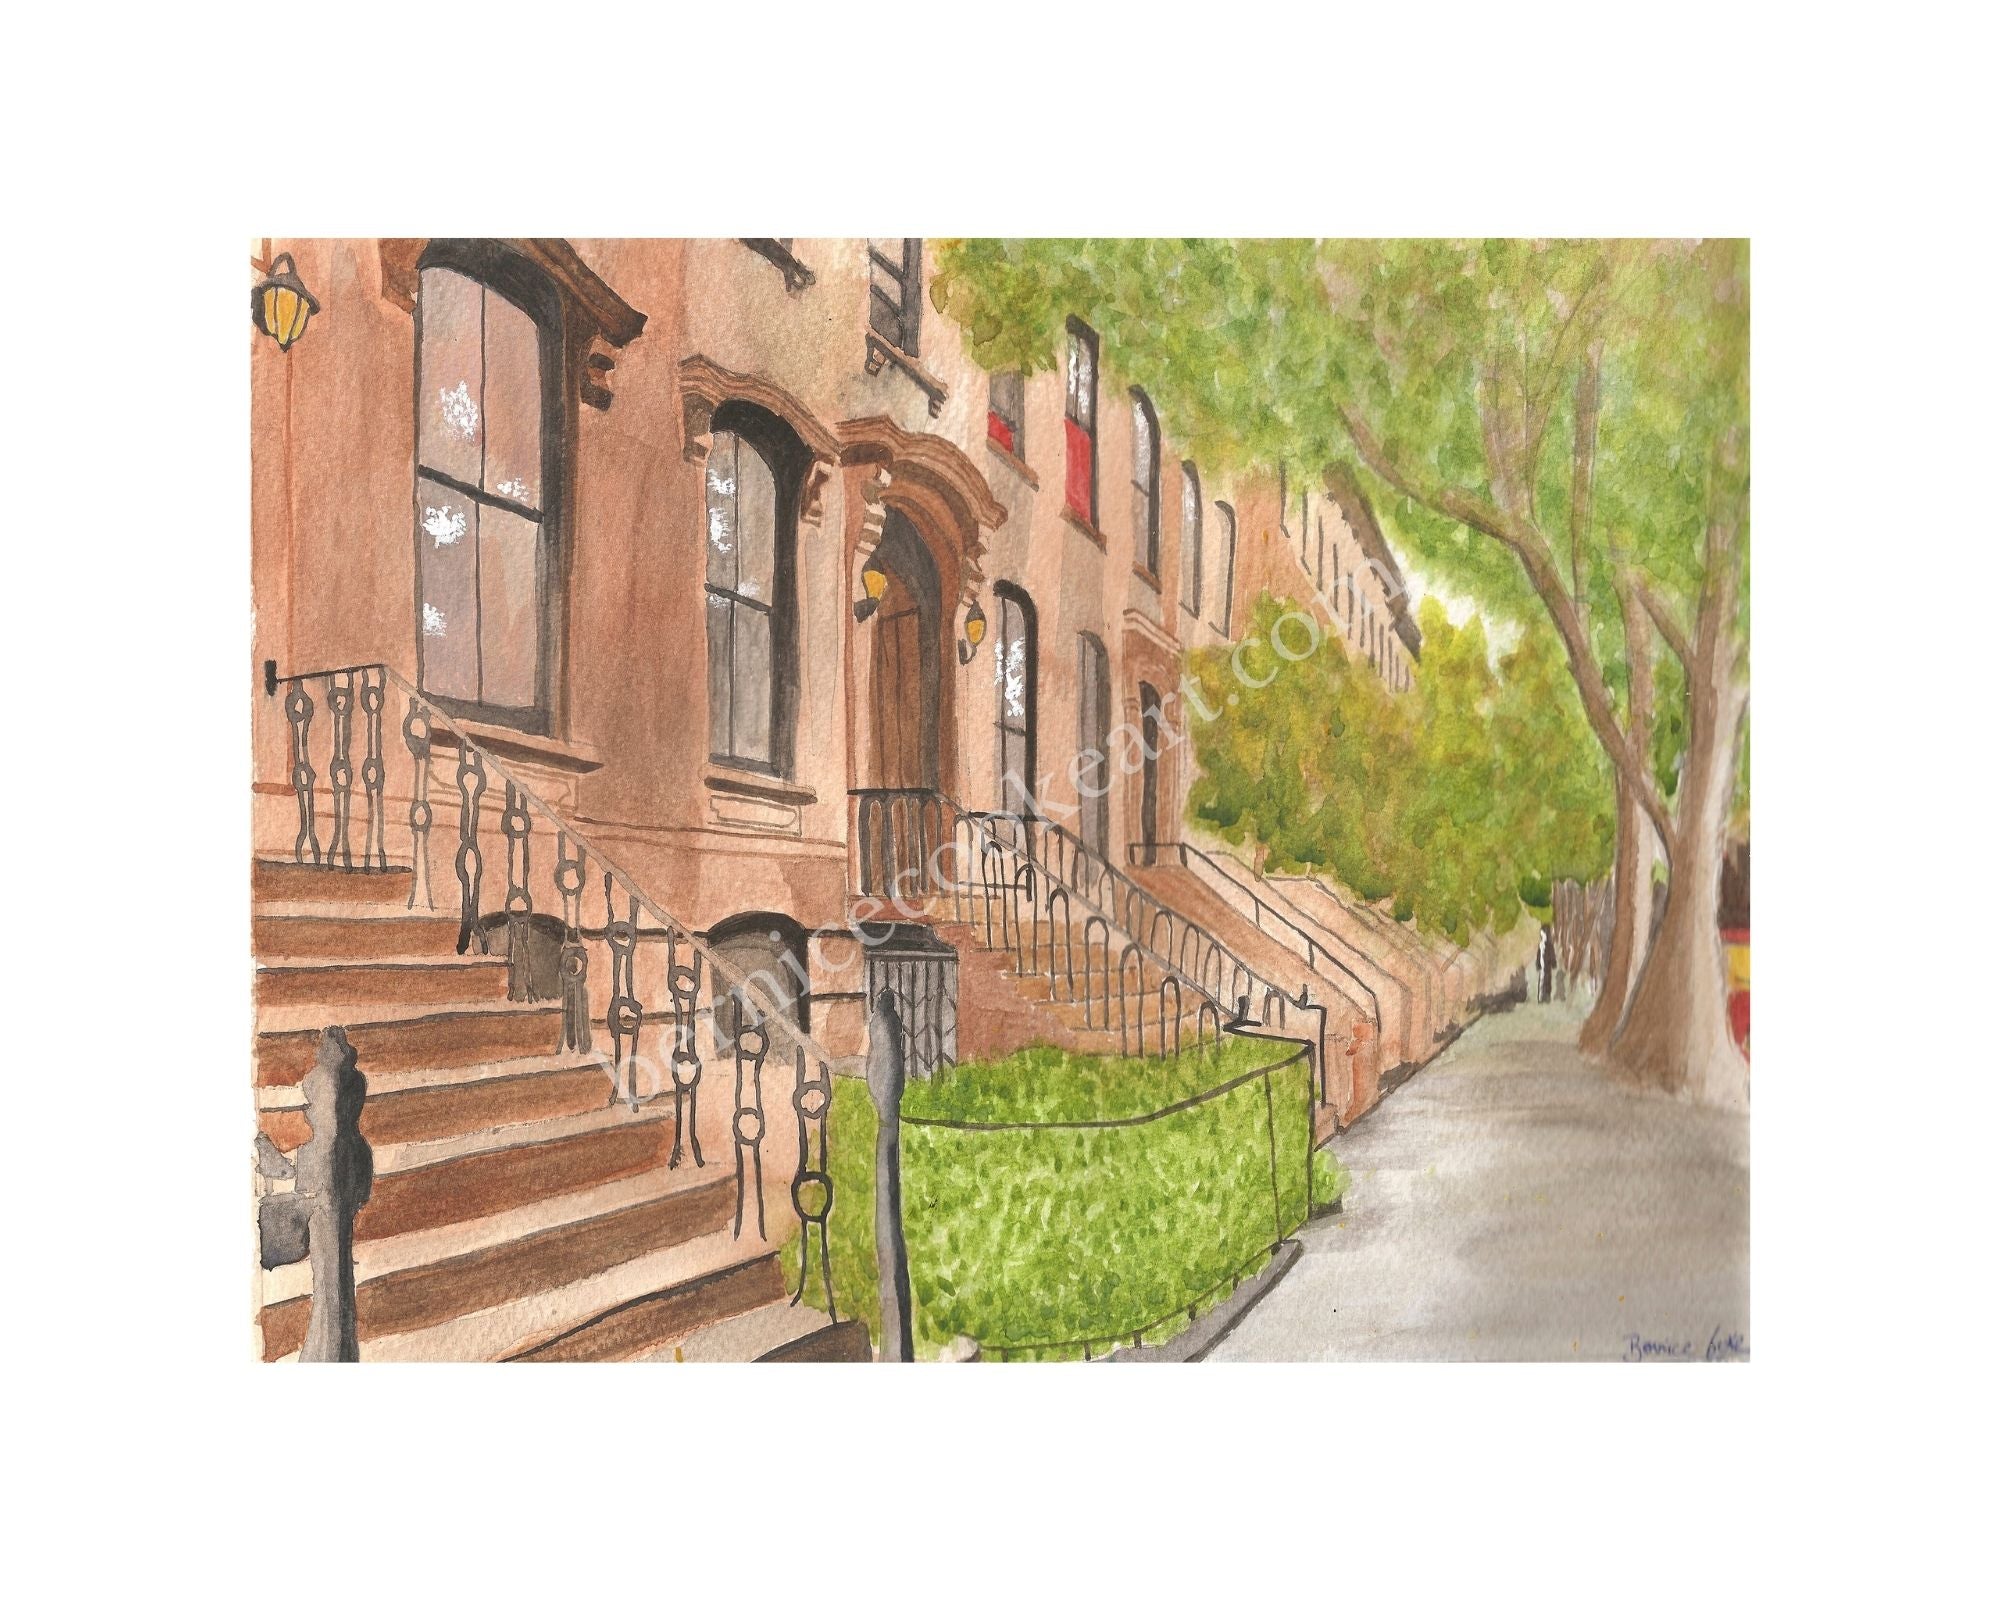 Brownstone New York - Pen & Watercolor Sketch - Giclée Print by Bernice Cooke - Mounted to 10" x 8".